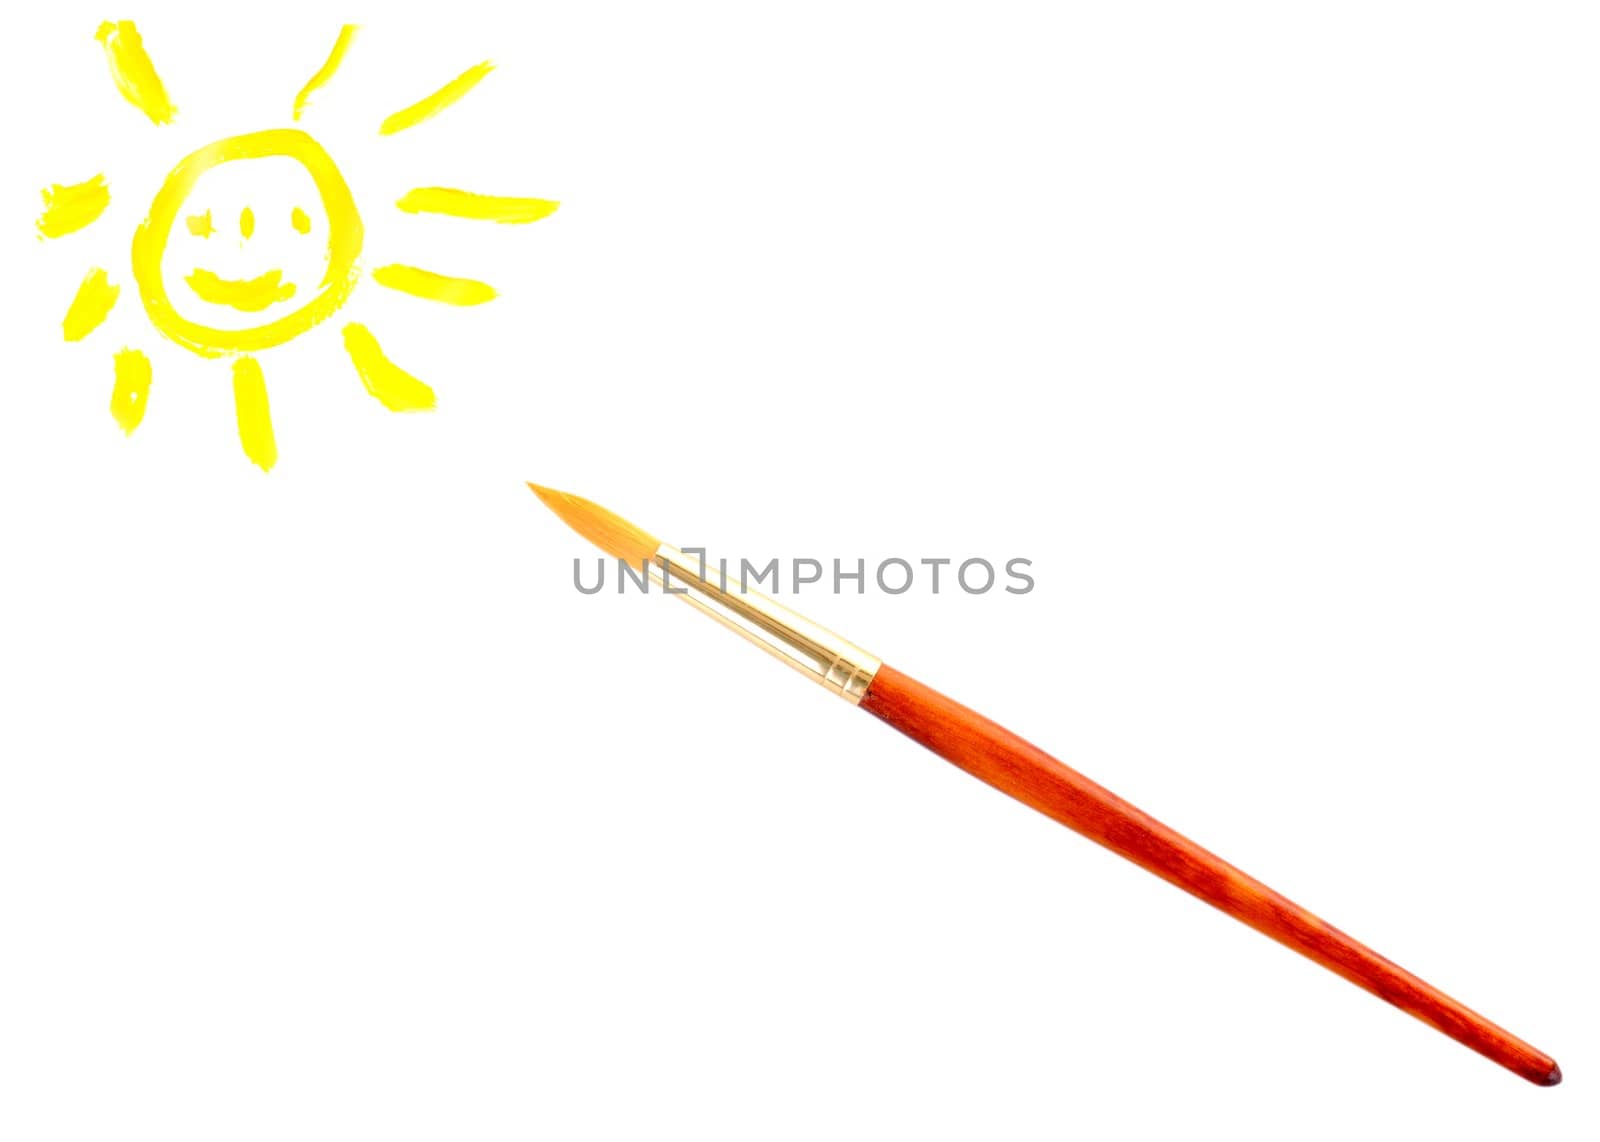 Smilling sun and small brush on white background